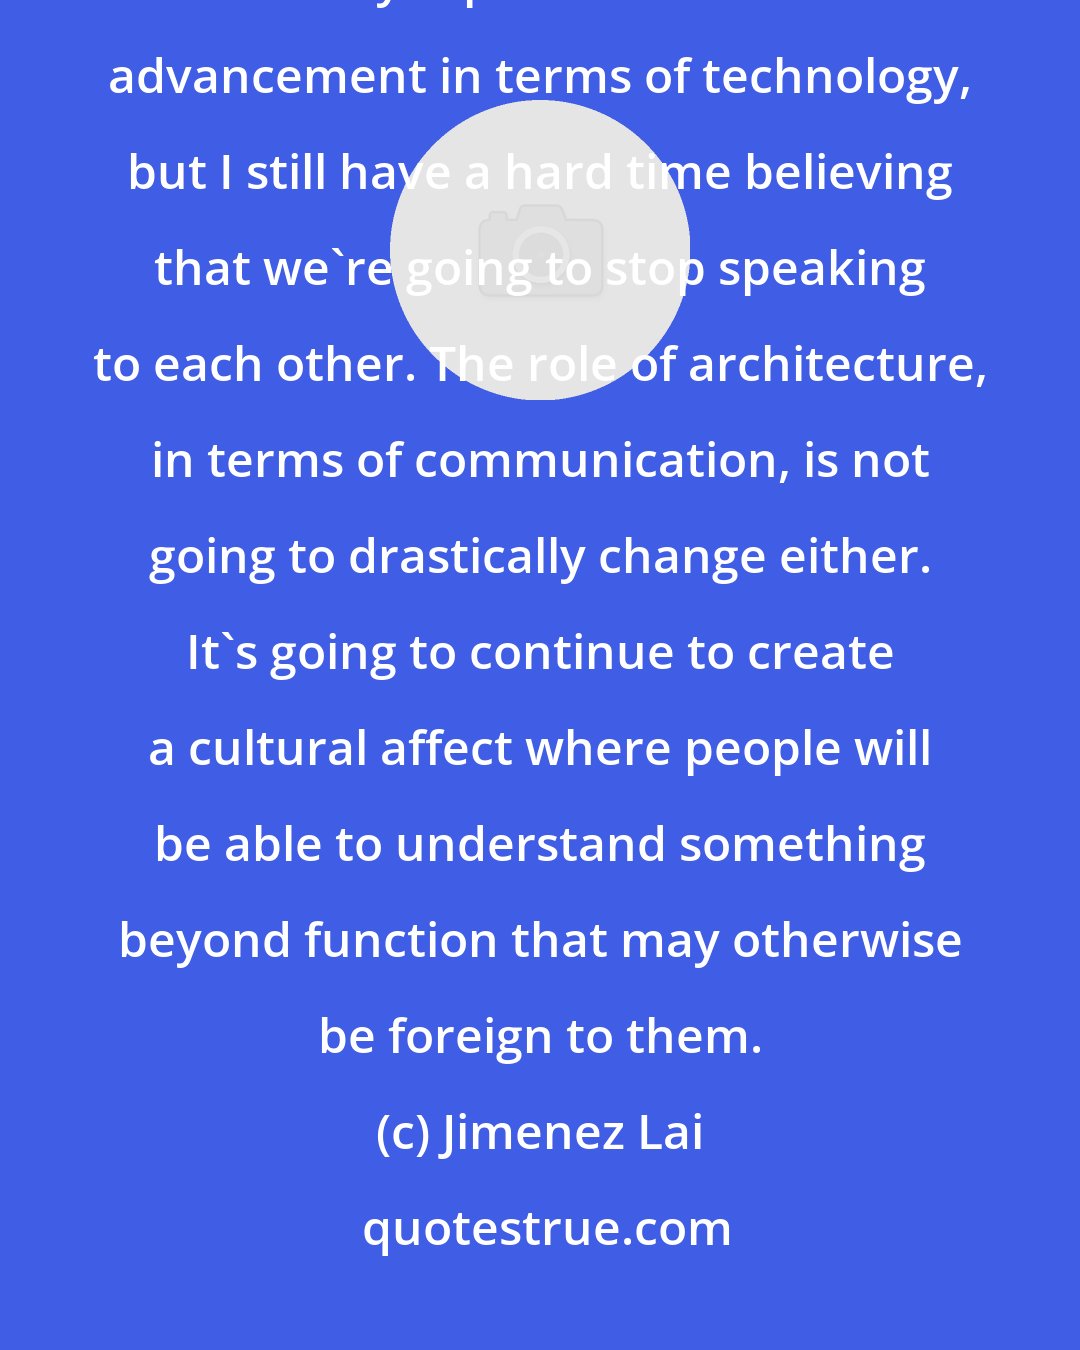 Jimenez Lai: In 500 years, English has changed a lot, and right now we're undergoing an extremely rapid rate of accelerated advancement in terms of technology, but I still have a hard time believing that we're going to stop speaking to each other. The role of architecture, in terms of communication, is not going to drastically change either. It's going to continue to create a cultural affect where people will be able to understand something beyond function that may otherwise be foreign to them.